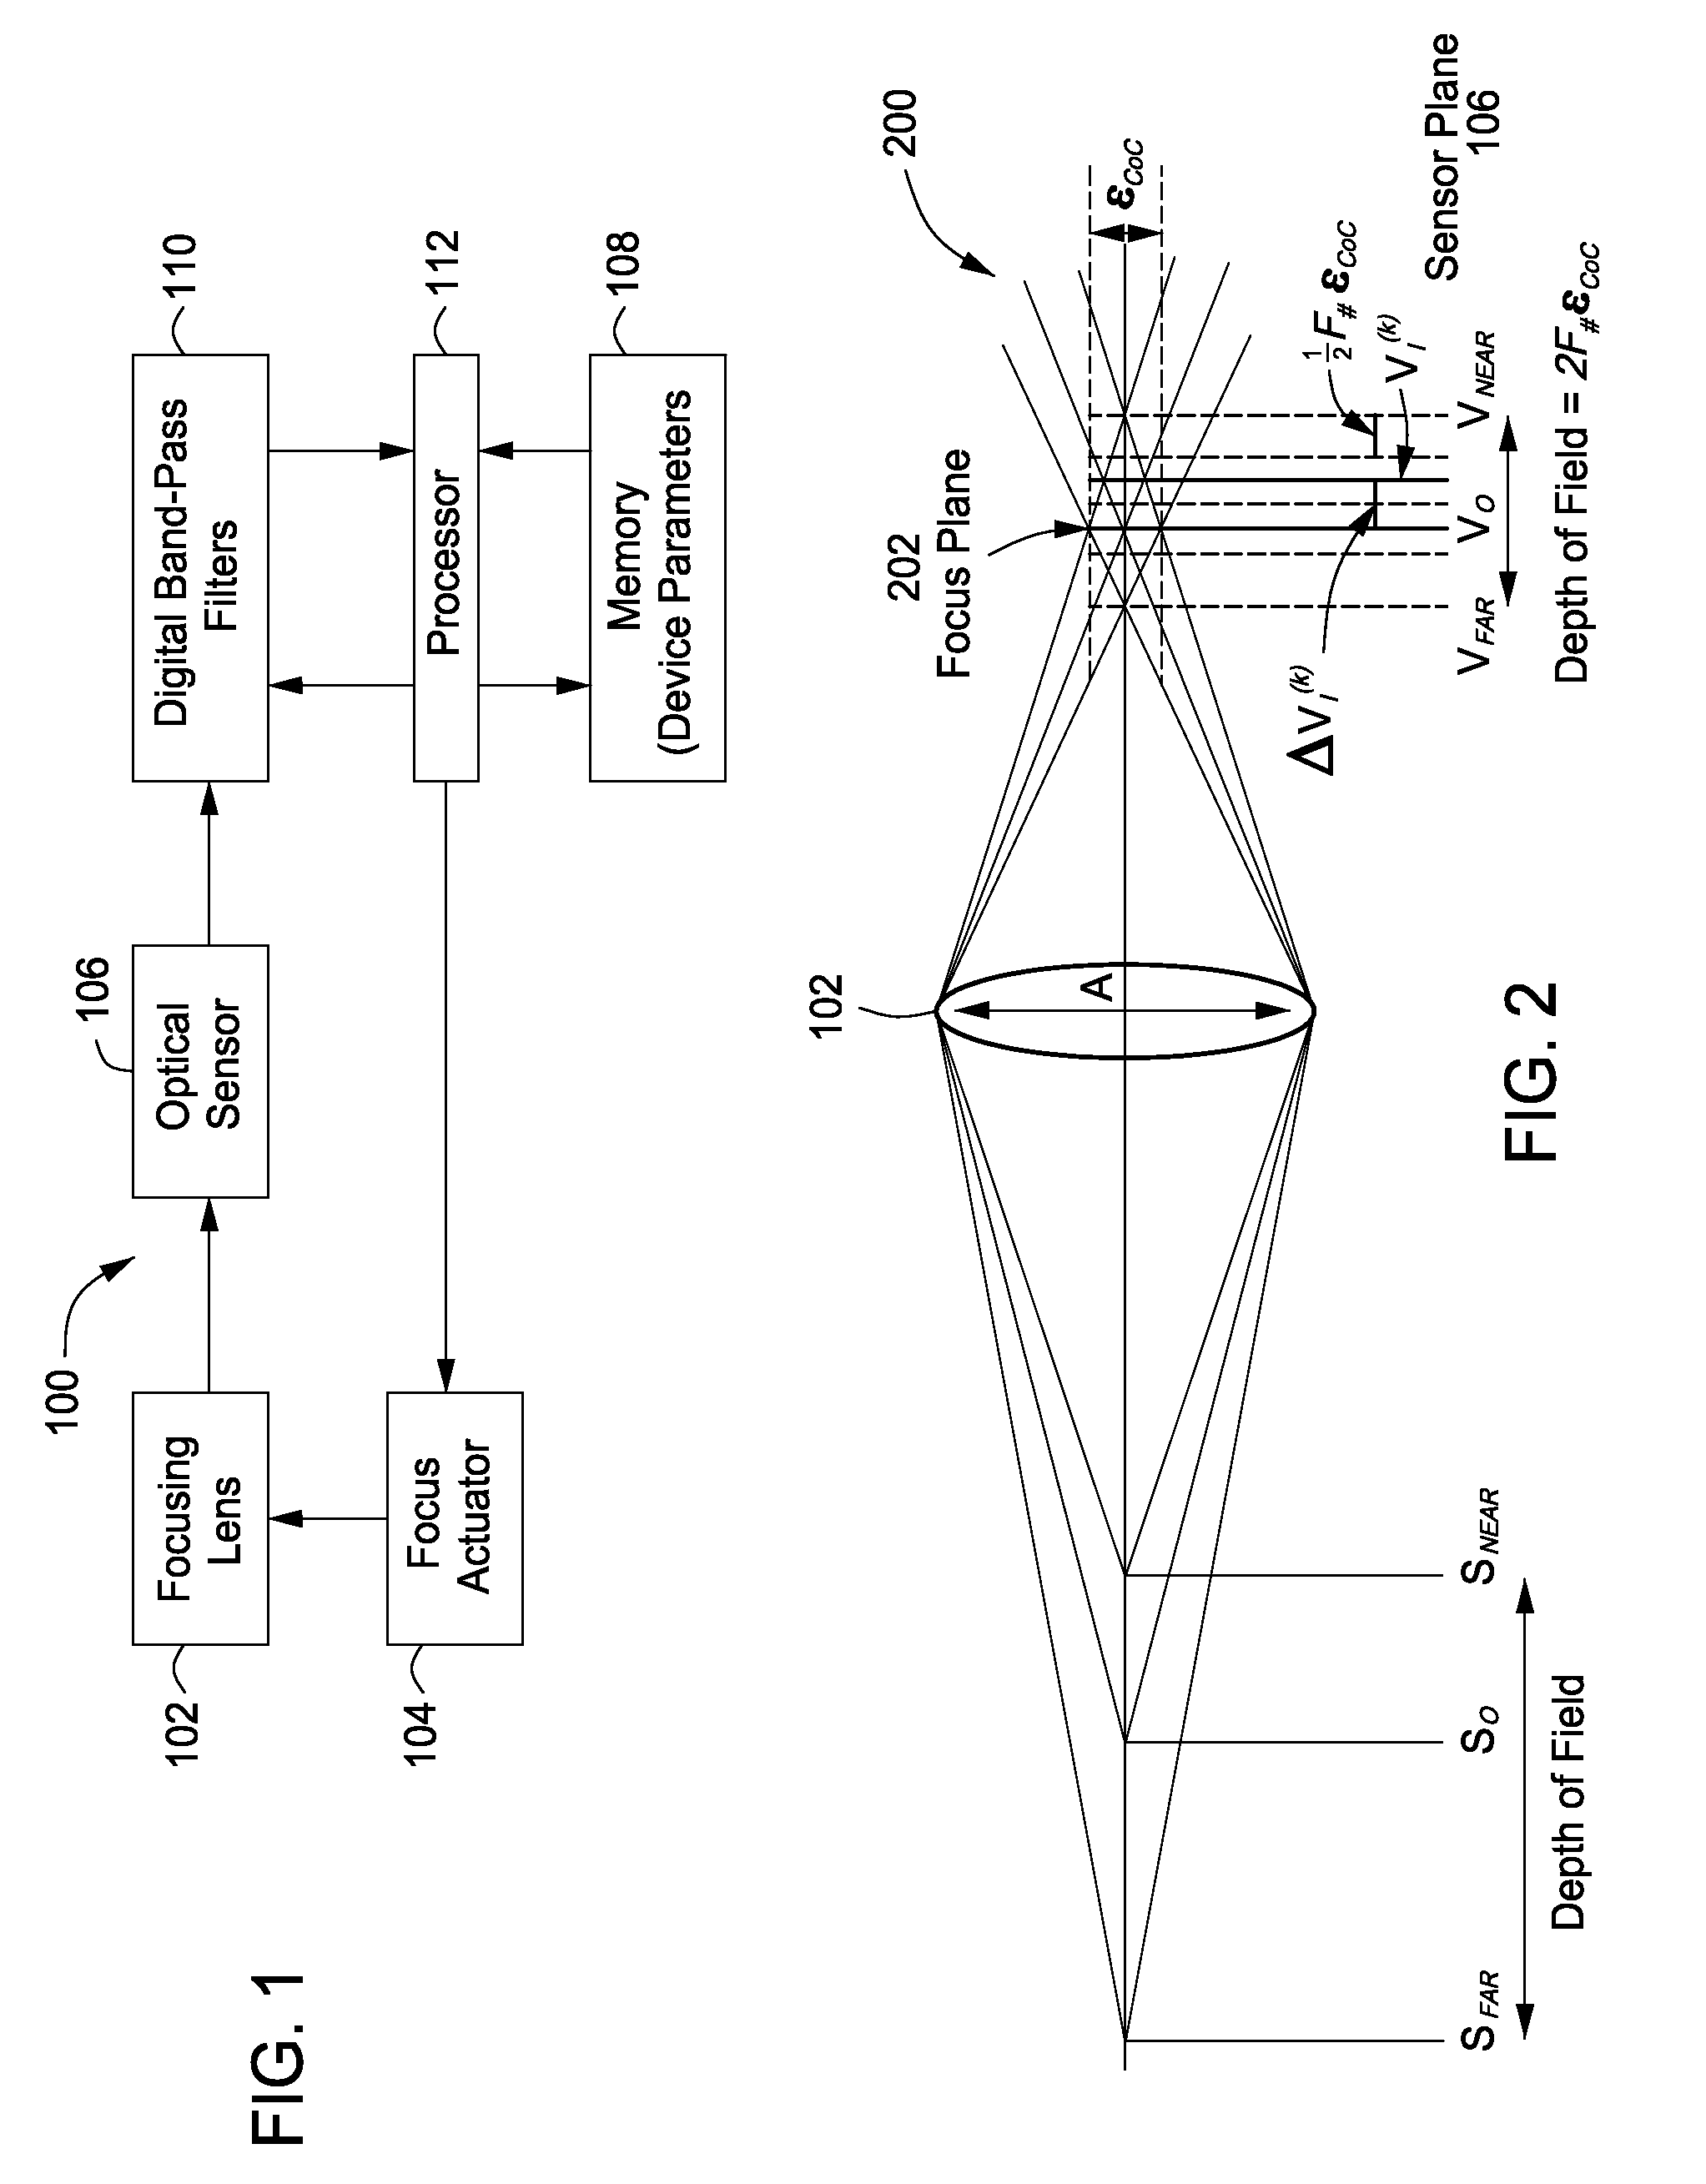 Automatic Focusing Apparatus and Method for Digital Images Using Automatic Filter Switching